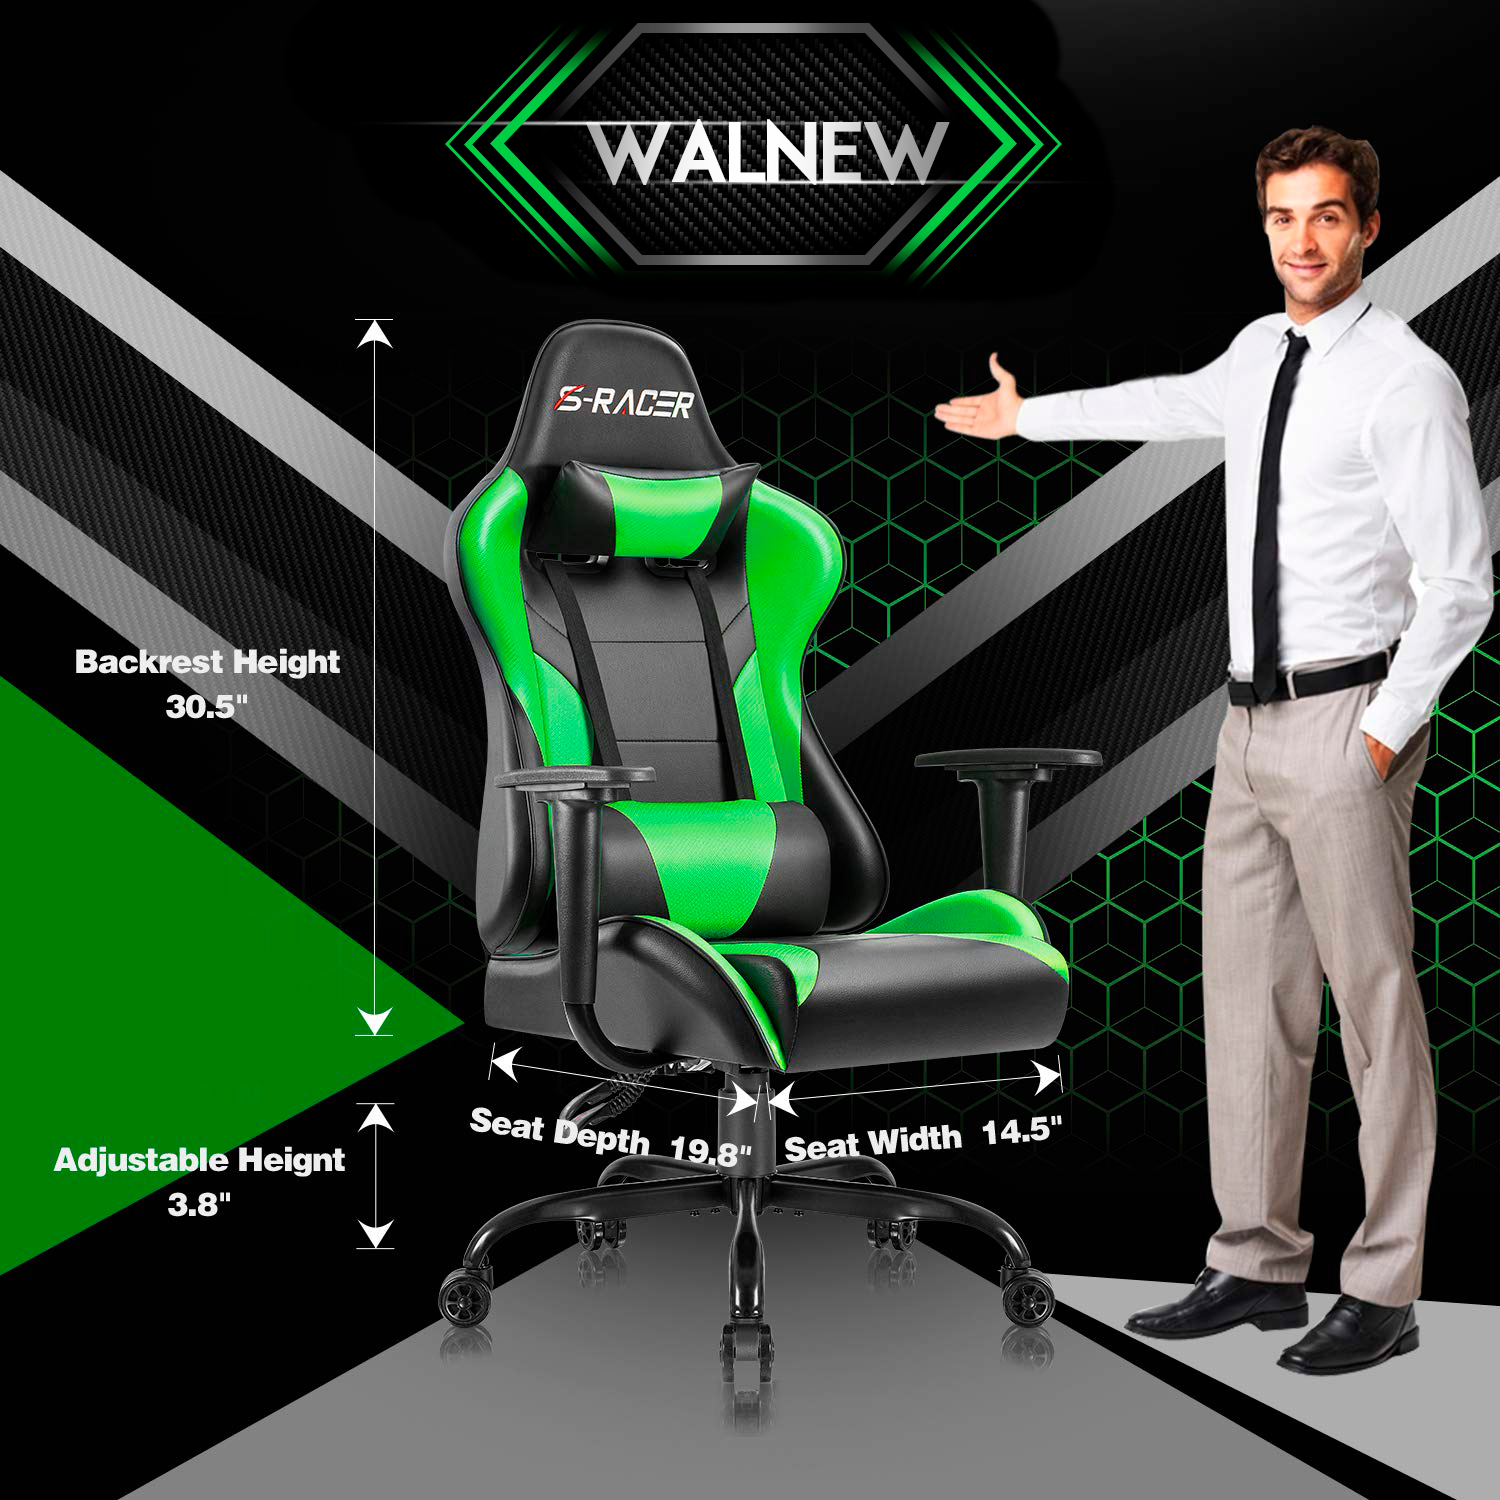 Lacoo Gaming Chair PU Leather Reclining Racing Style Ergonomic Office Chair with Headrest and Lumbar Support, Green - image 2 of 7